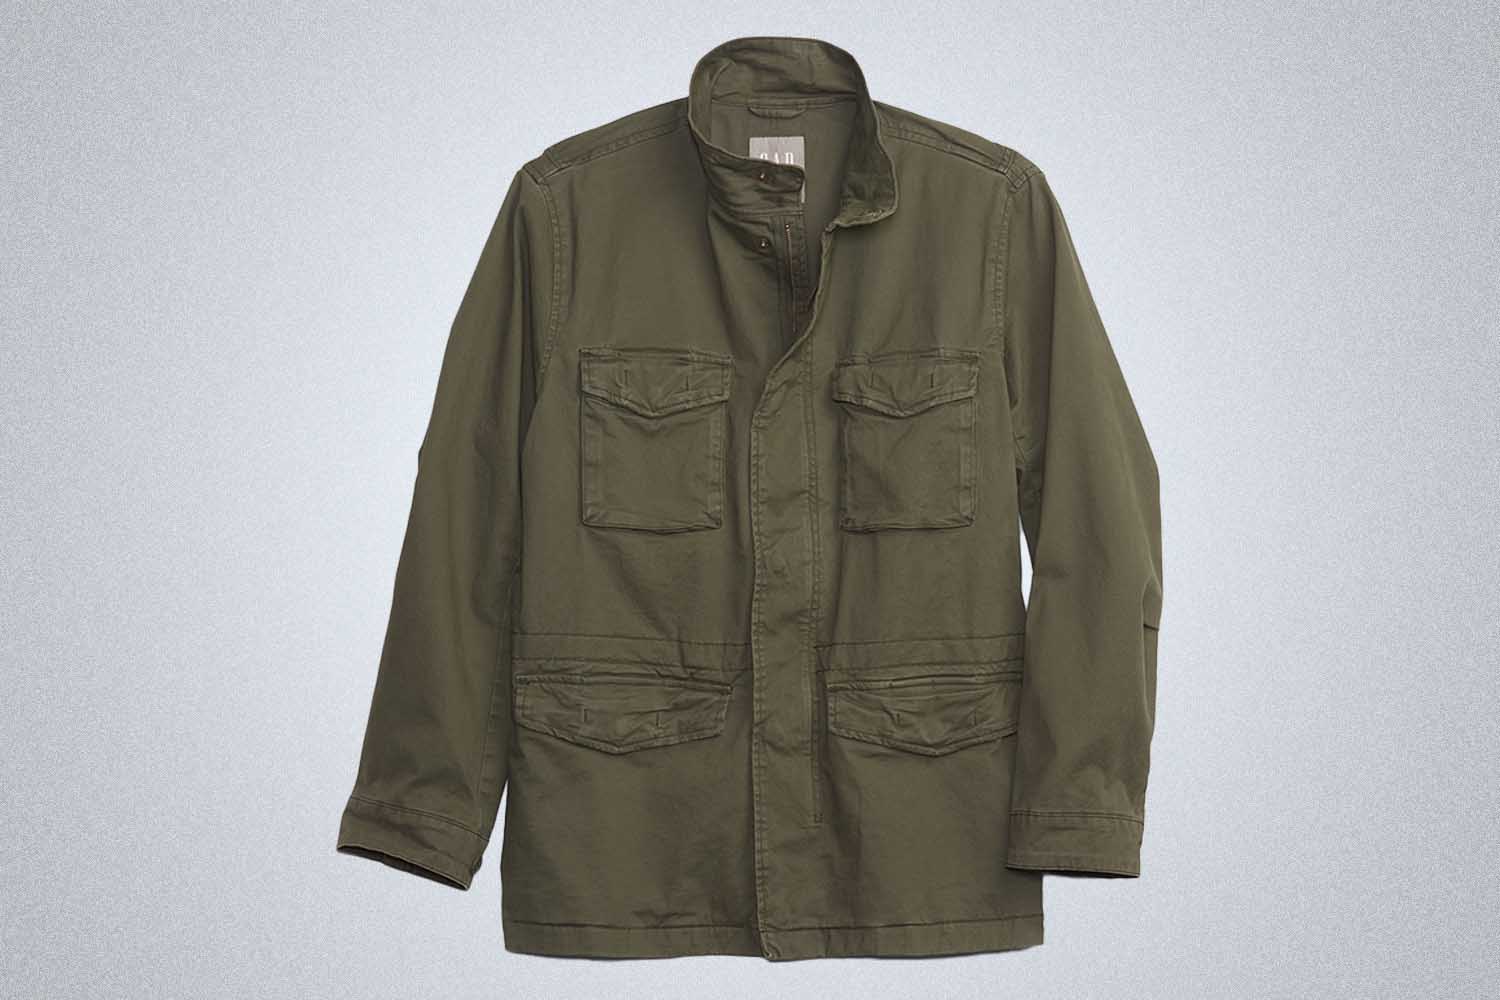 a grey lightweight jacket from Gap on a grey background